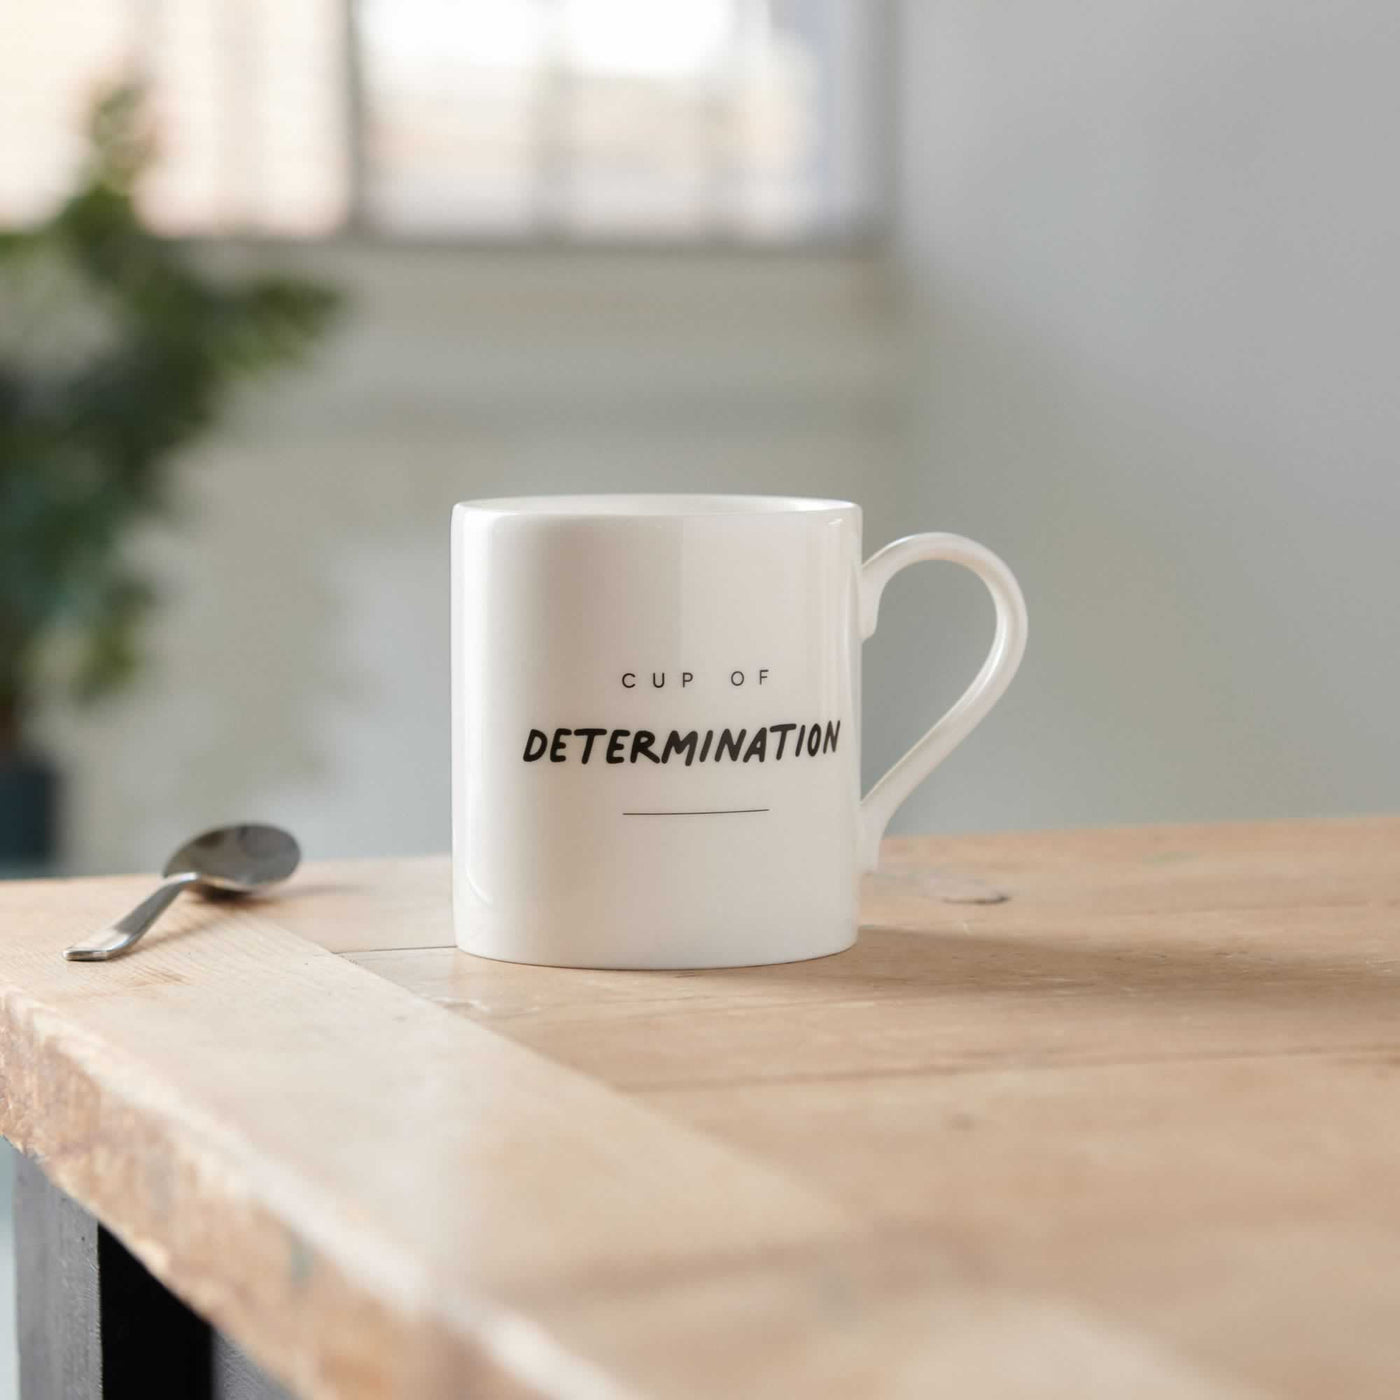 Cup of Determination Mug on table